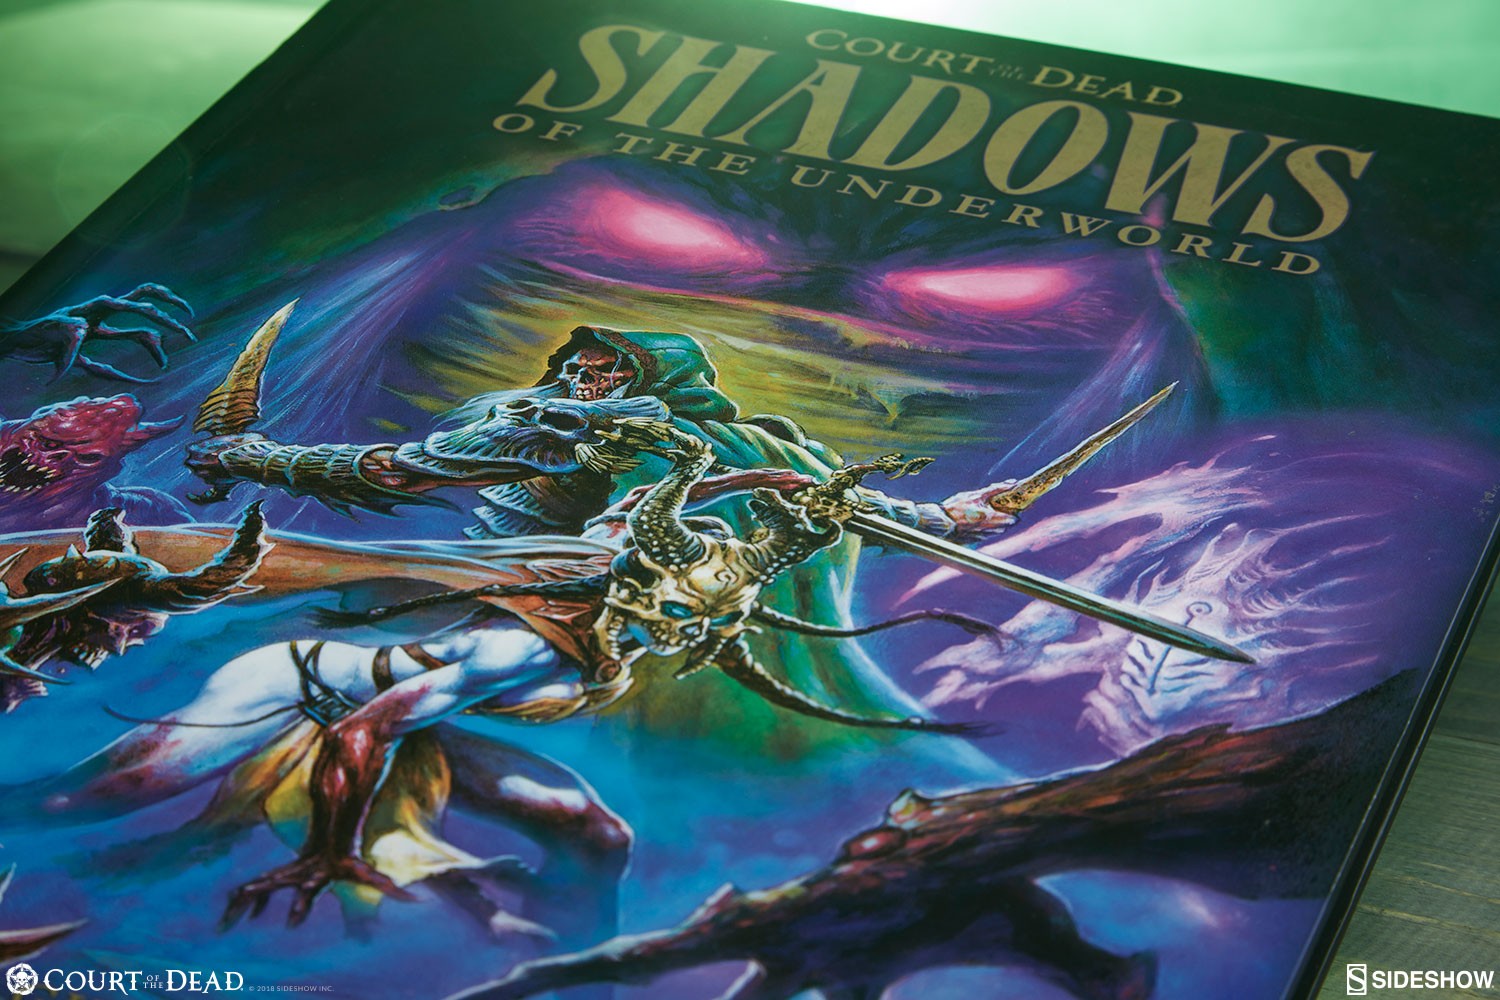 Shadows of the Underworld Graphic Novel (Prototype Shown) View 2